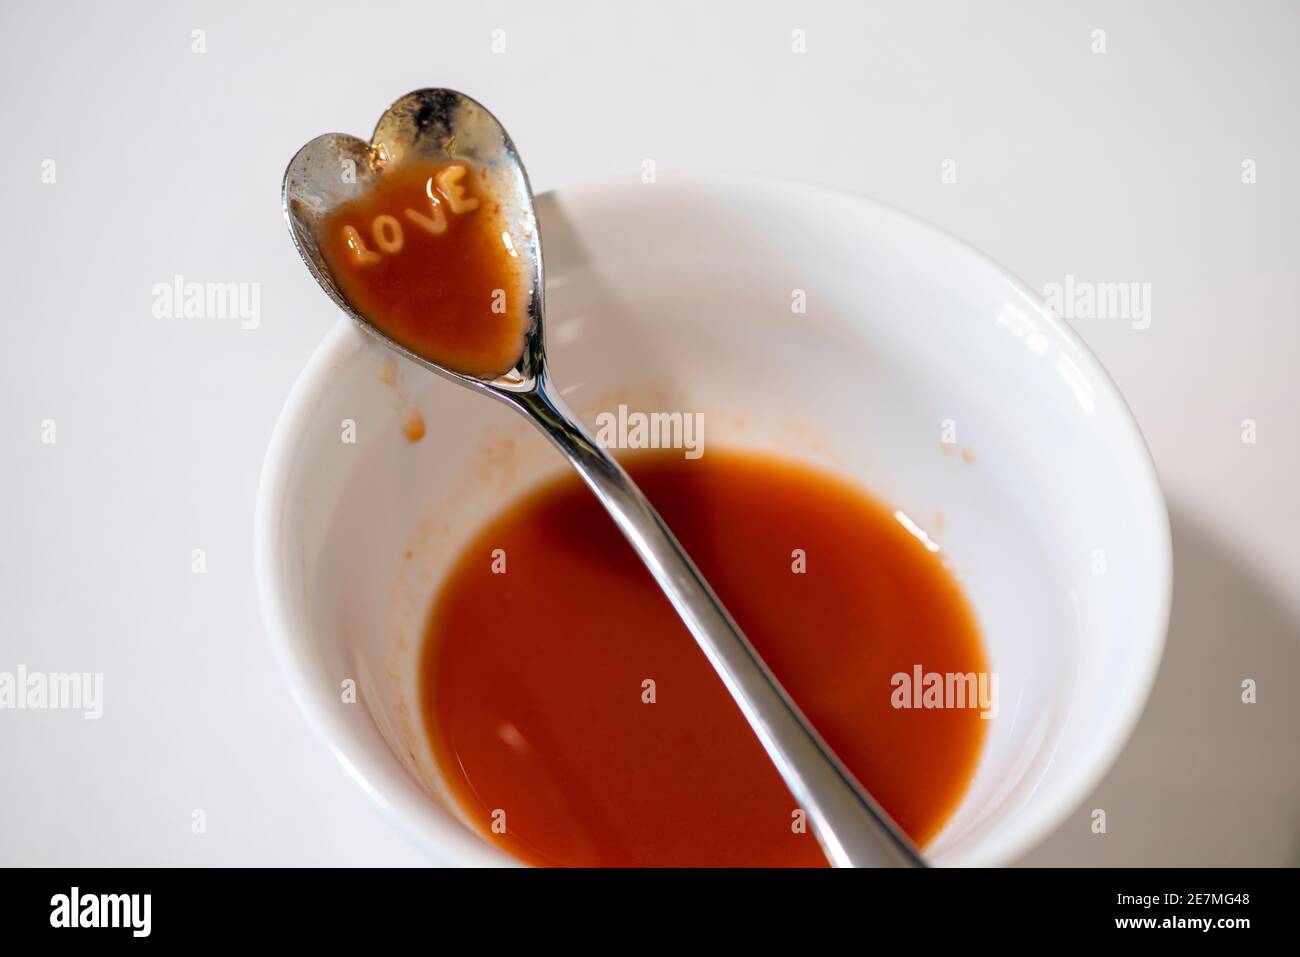 A heart-shaped spoonful of tomato alphabet soup spells out 'LOVE'. Studio set up on white. Stock Photo